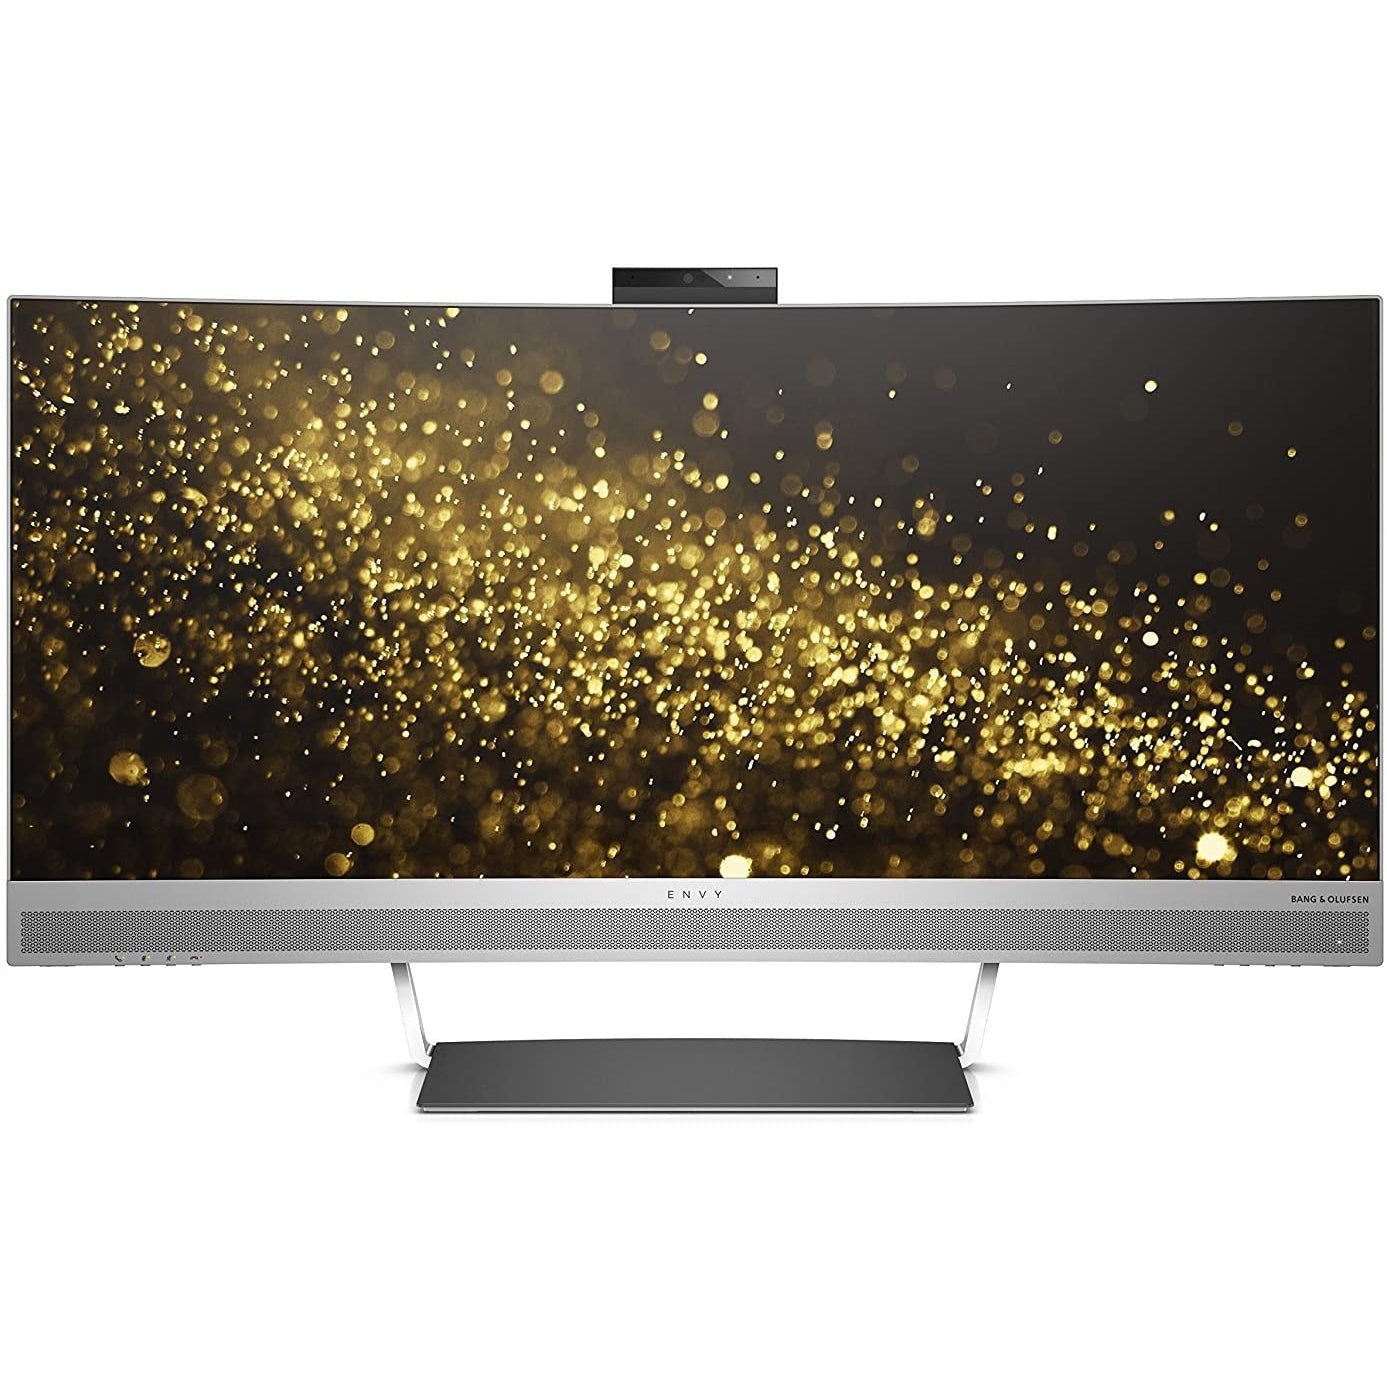 HP Envy 34 Curved Monitor 917539-004 - Silver